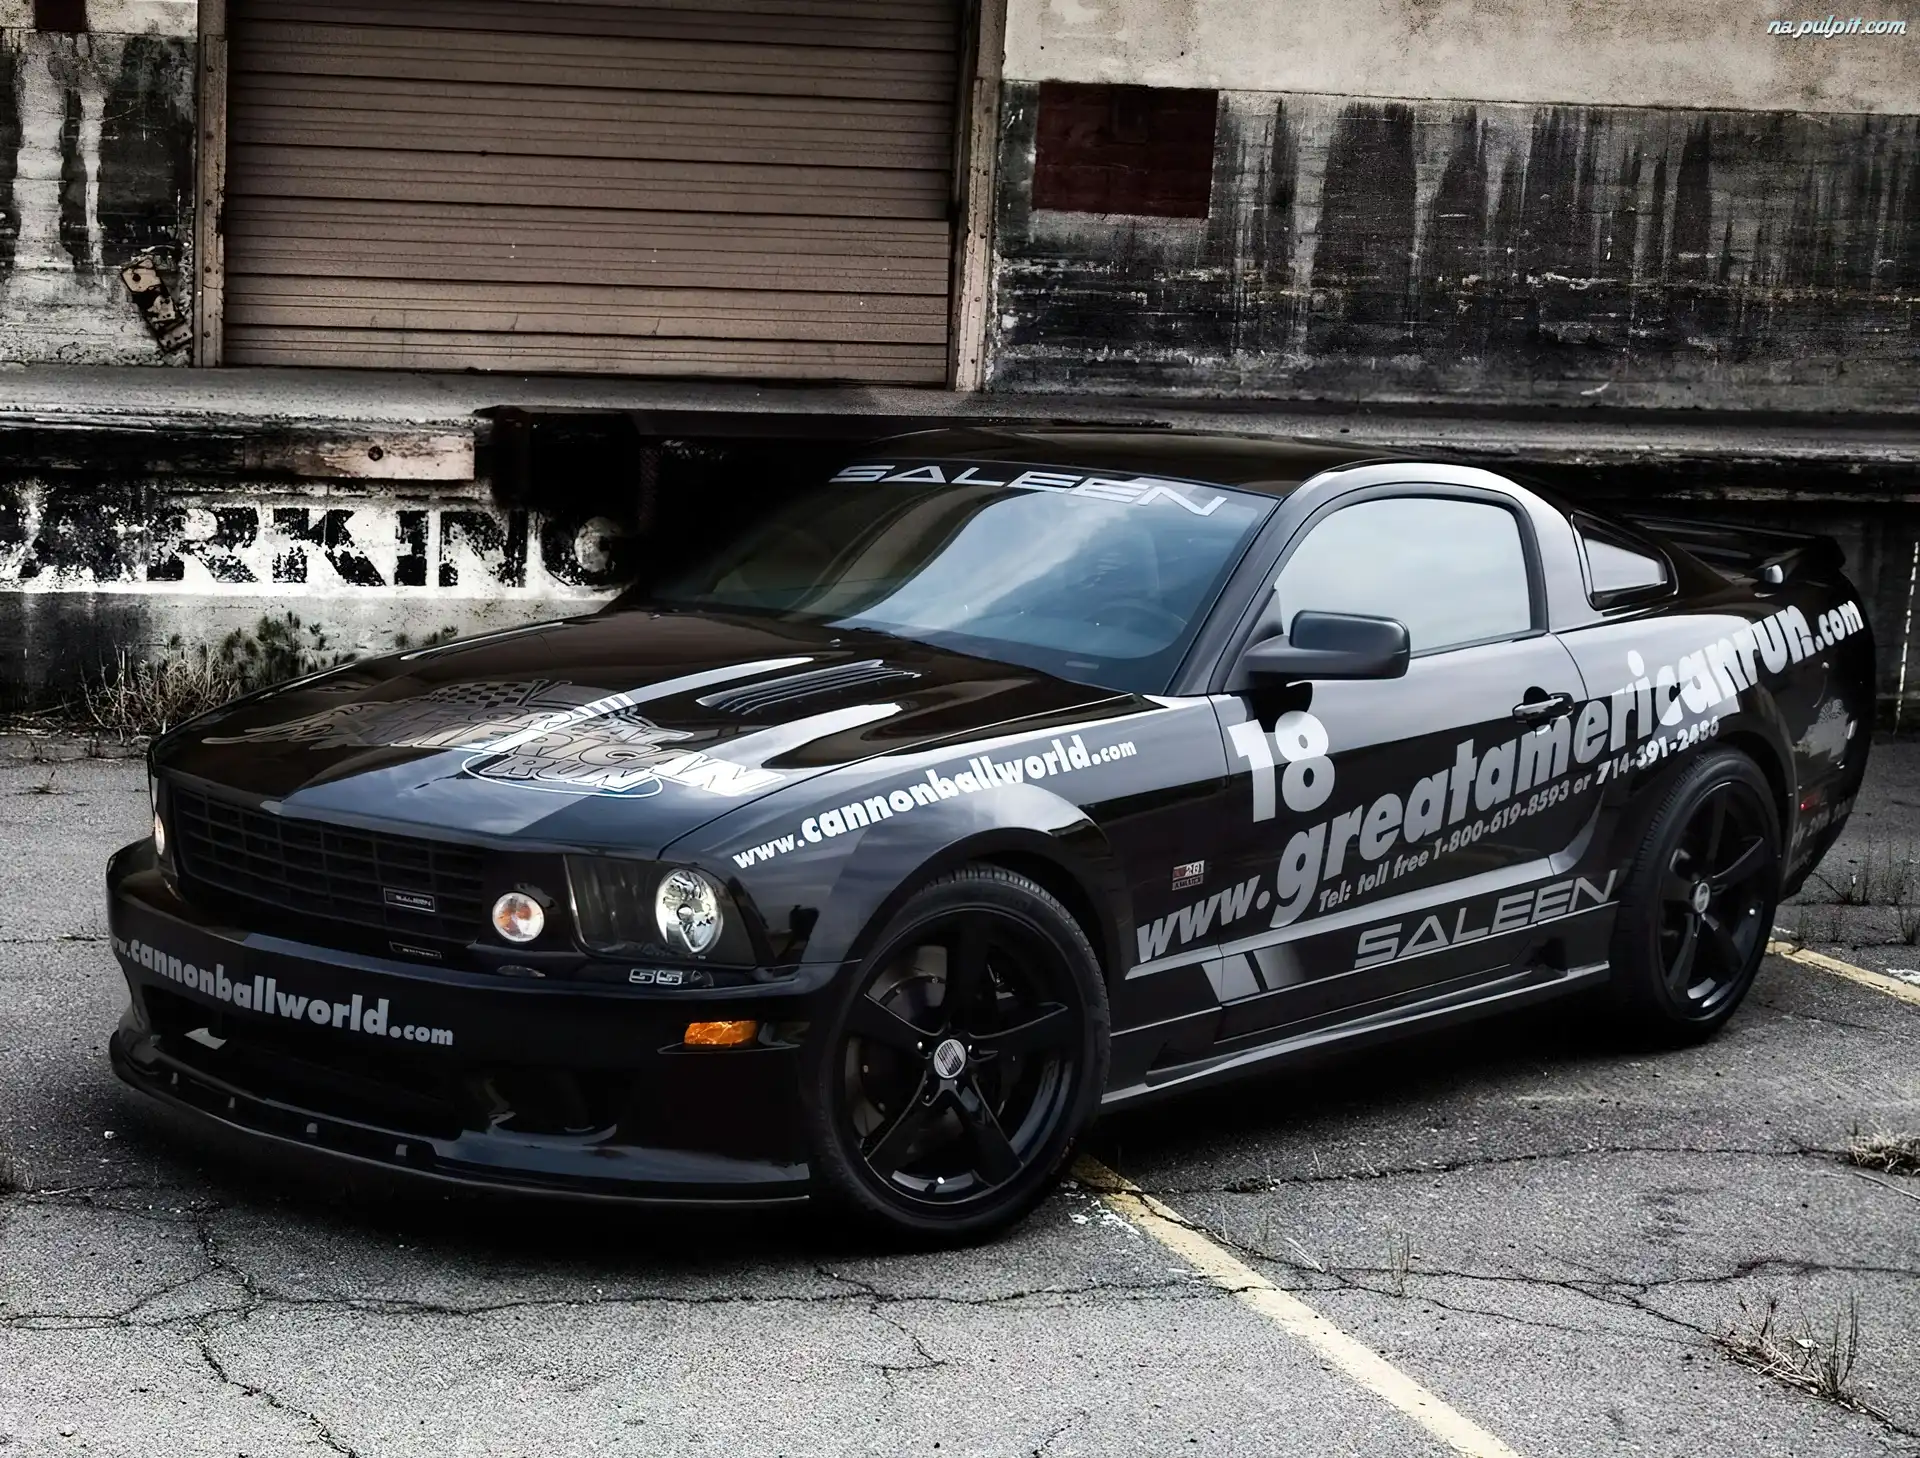 Ford Mustang, Tuning